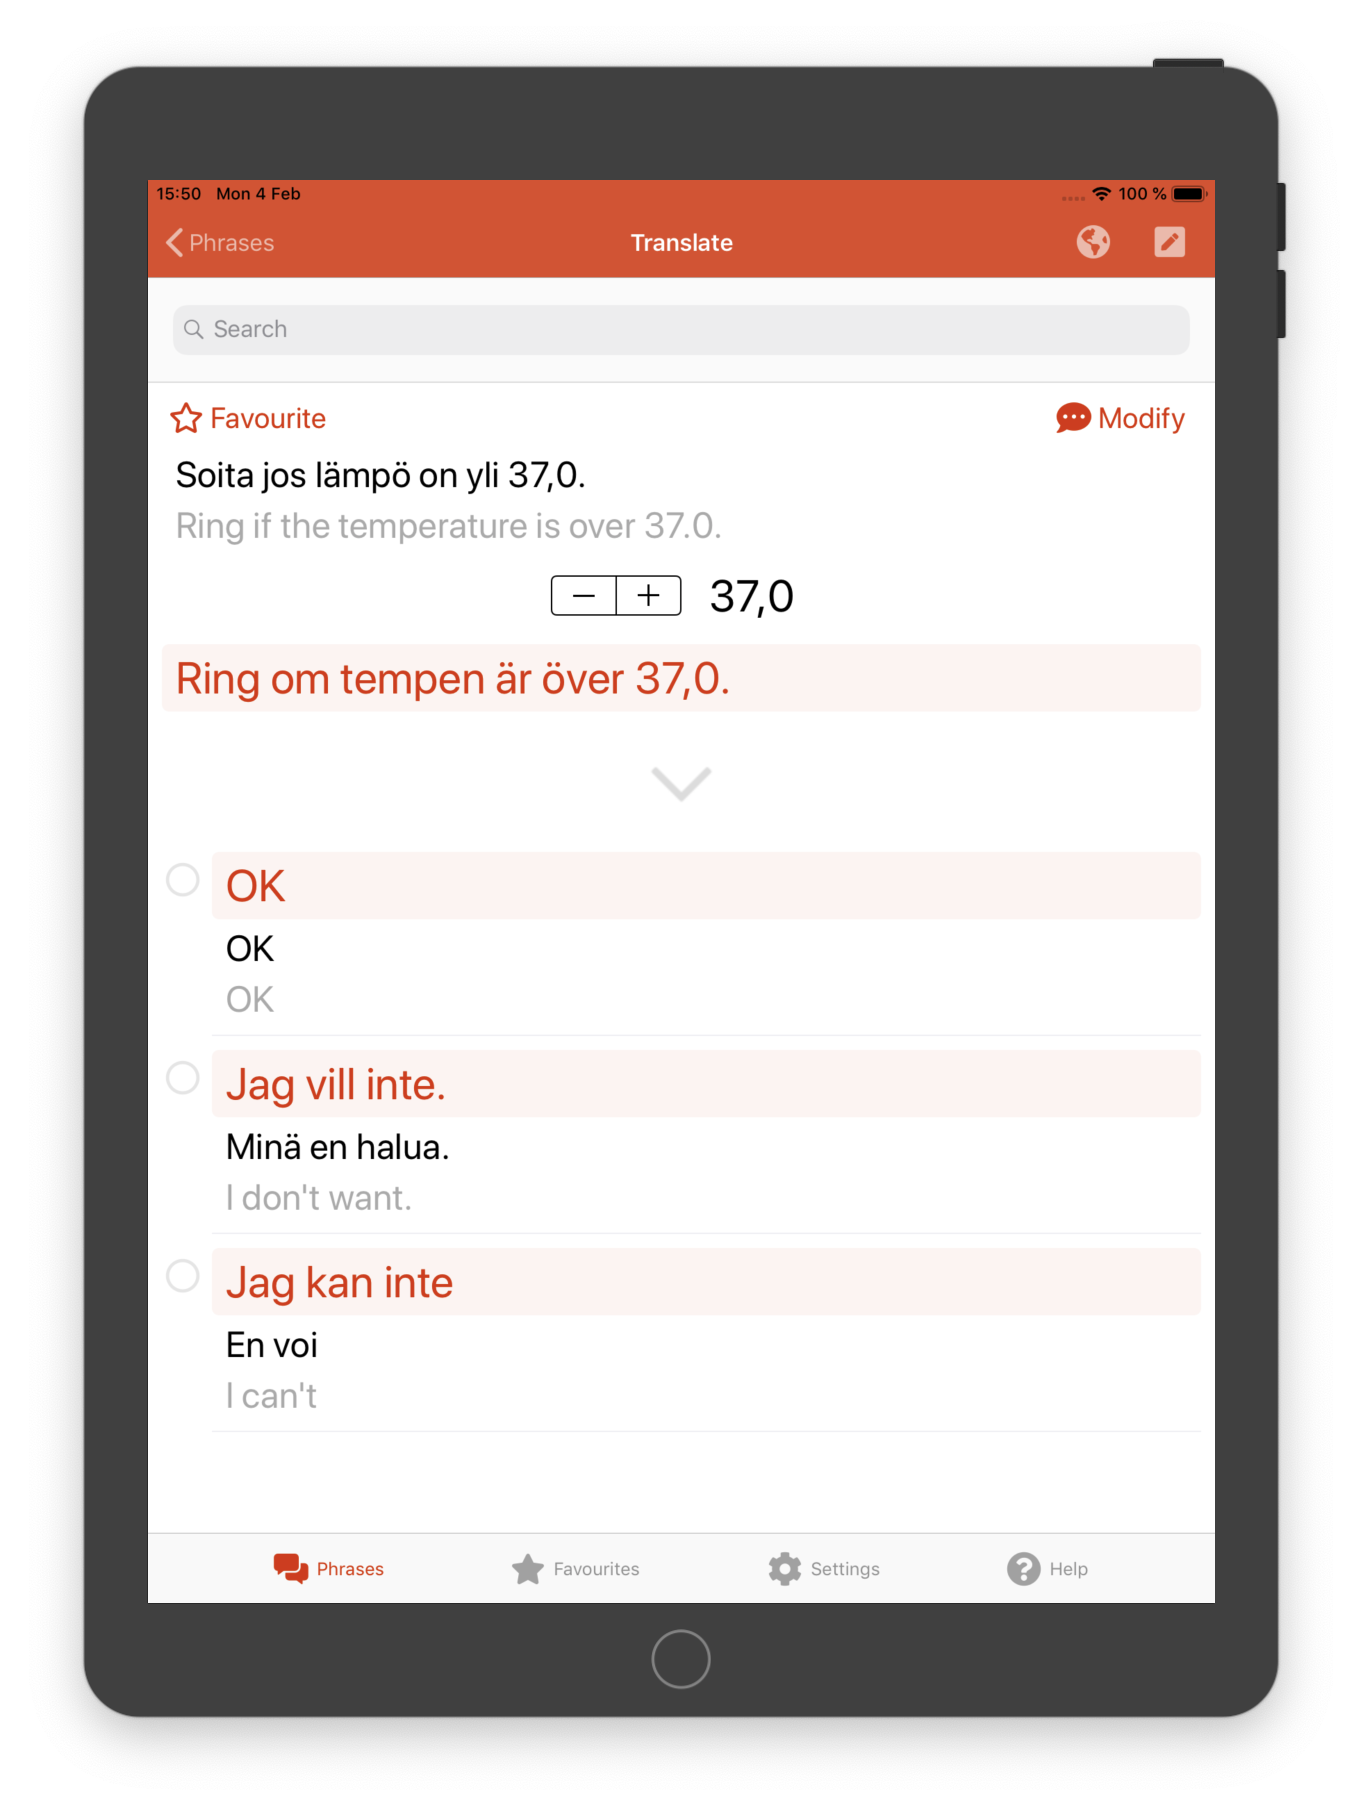 Obstetrics app: Translation from Finnish to Swedish with English as reference language